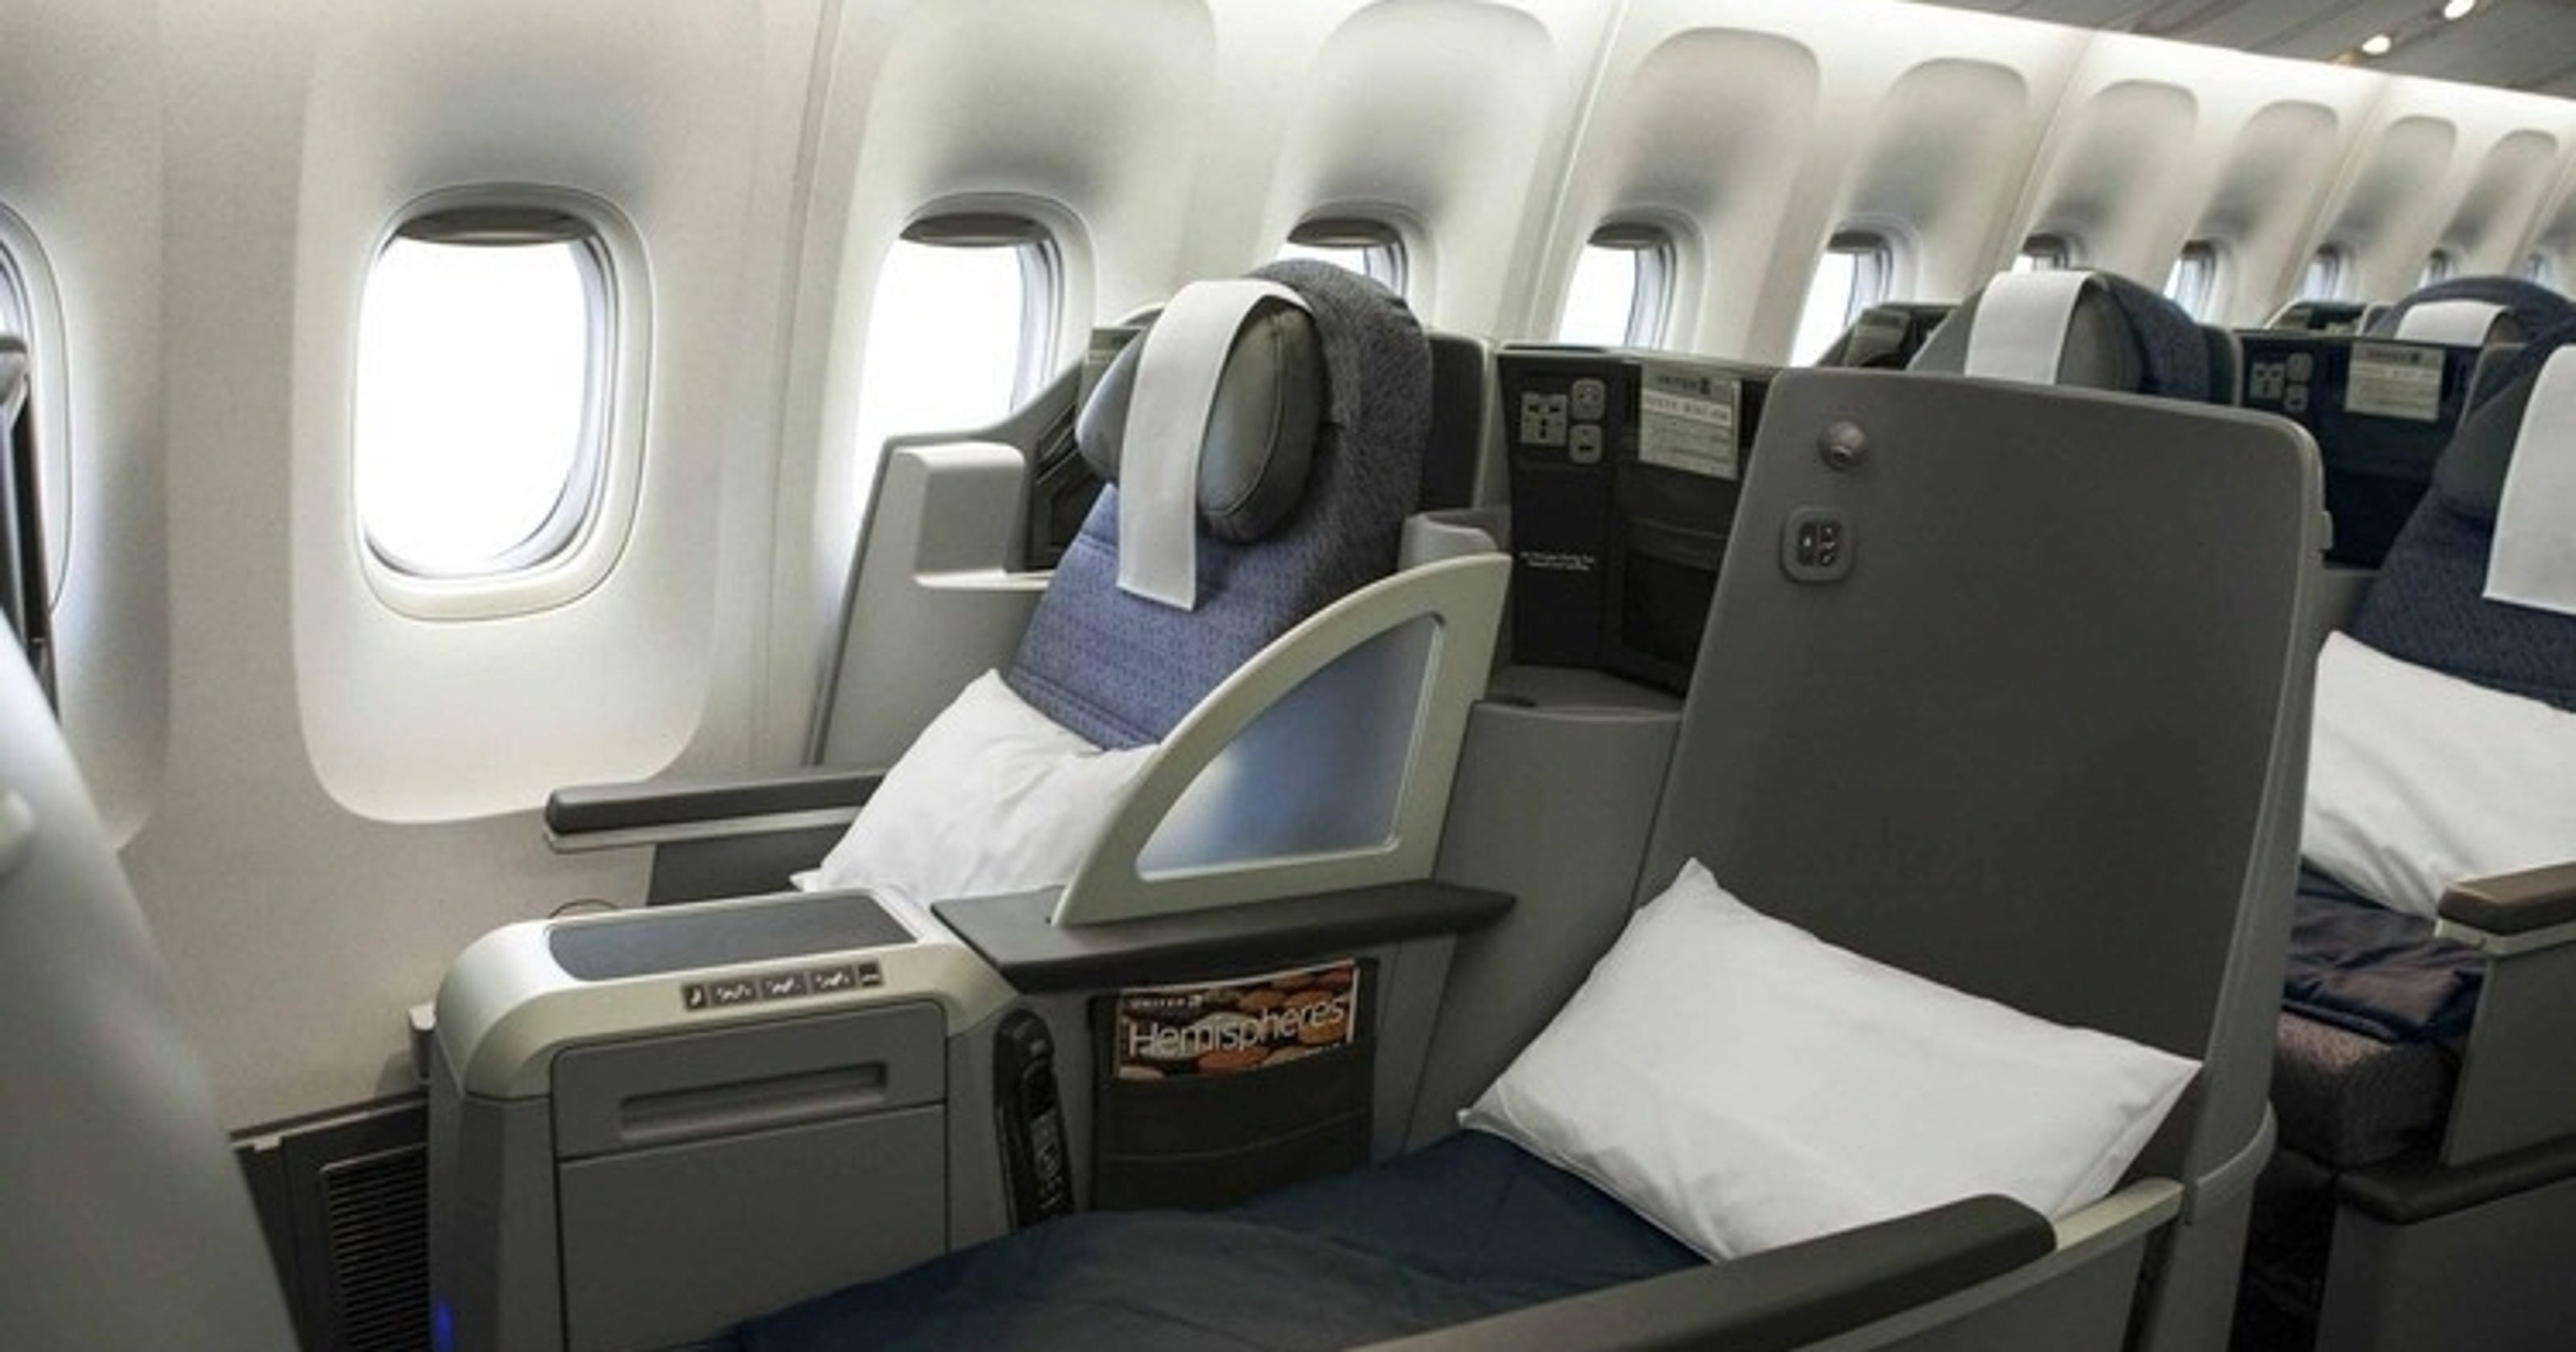 Is a lie-flat airplane seat worth the extra cost?